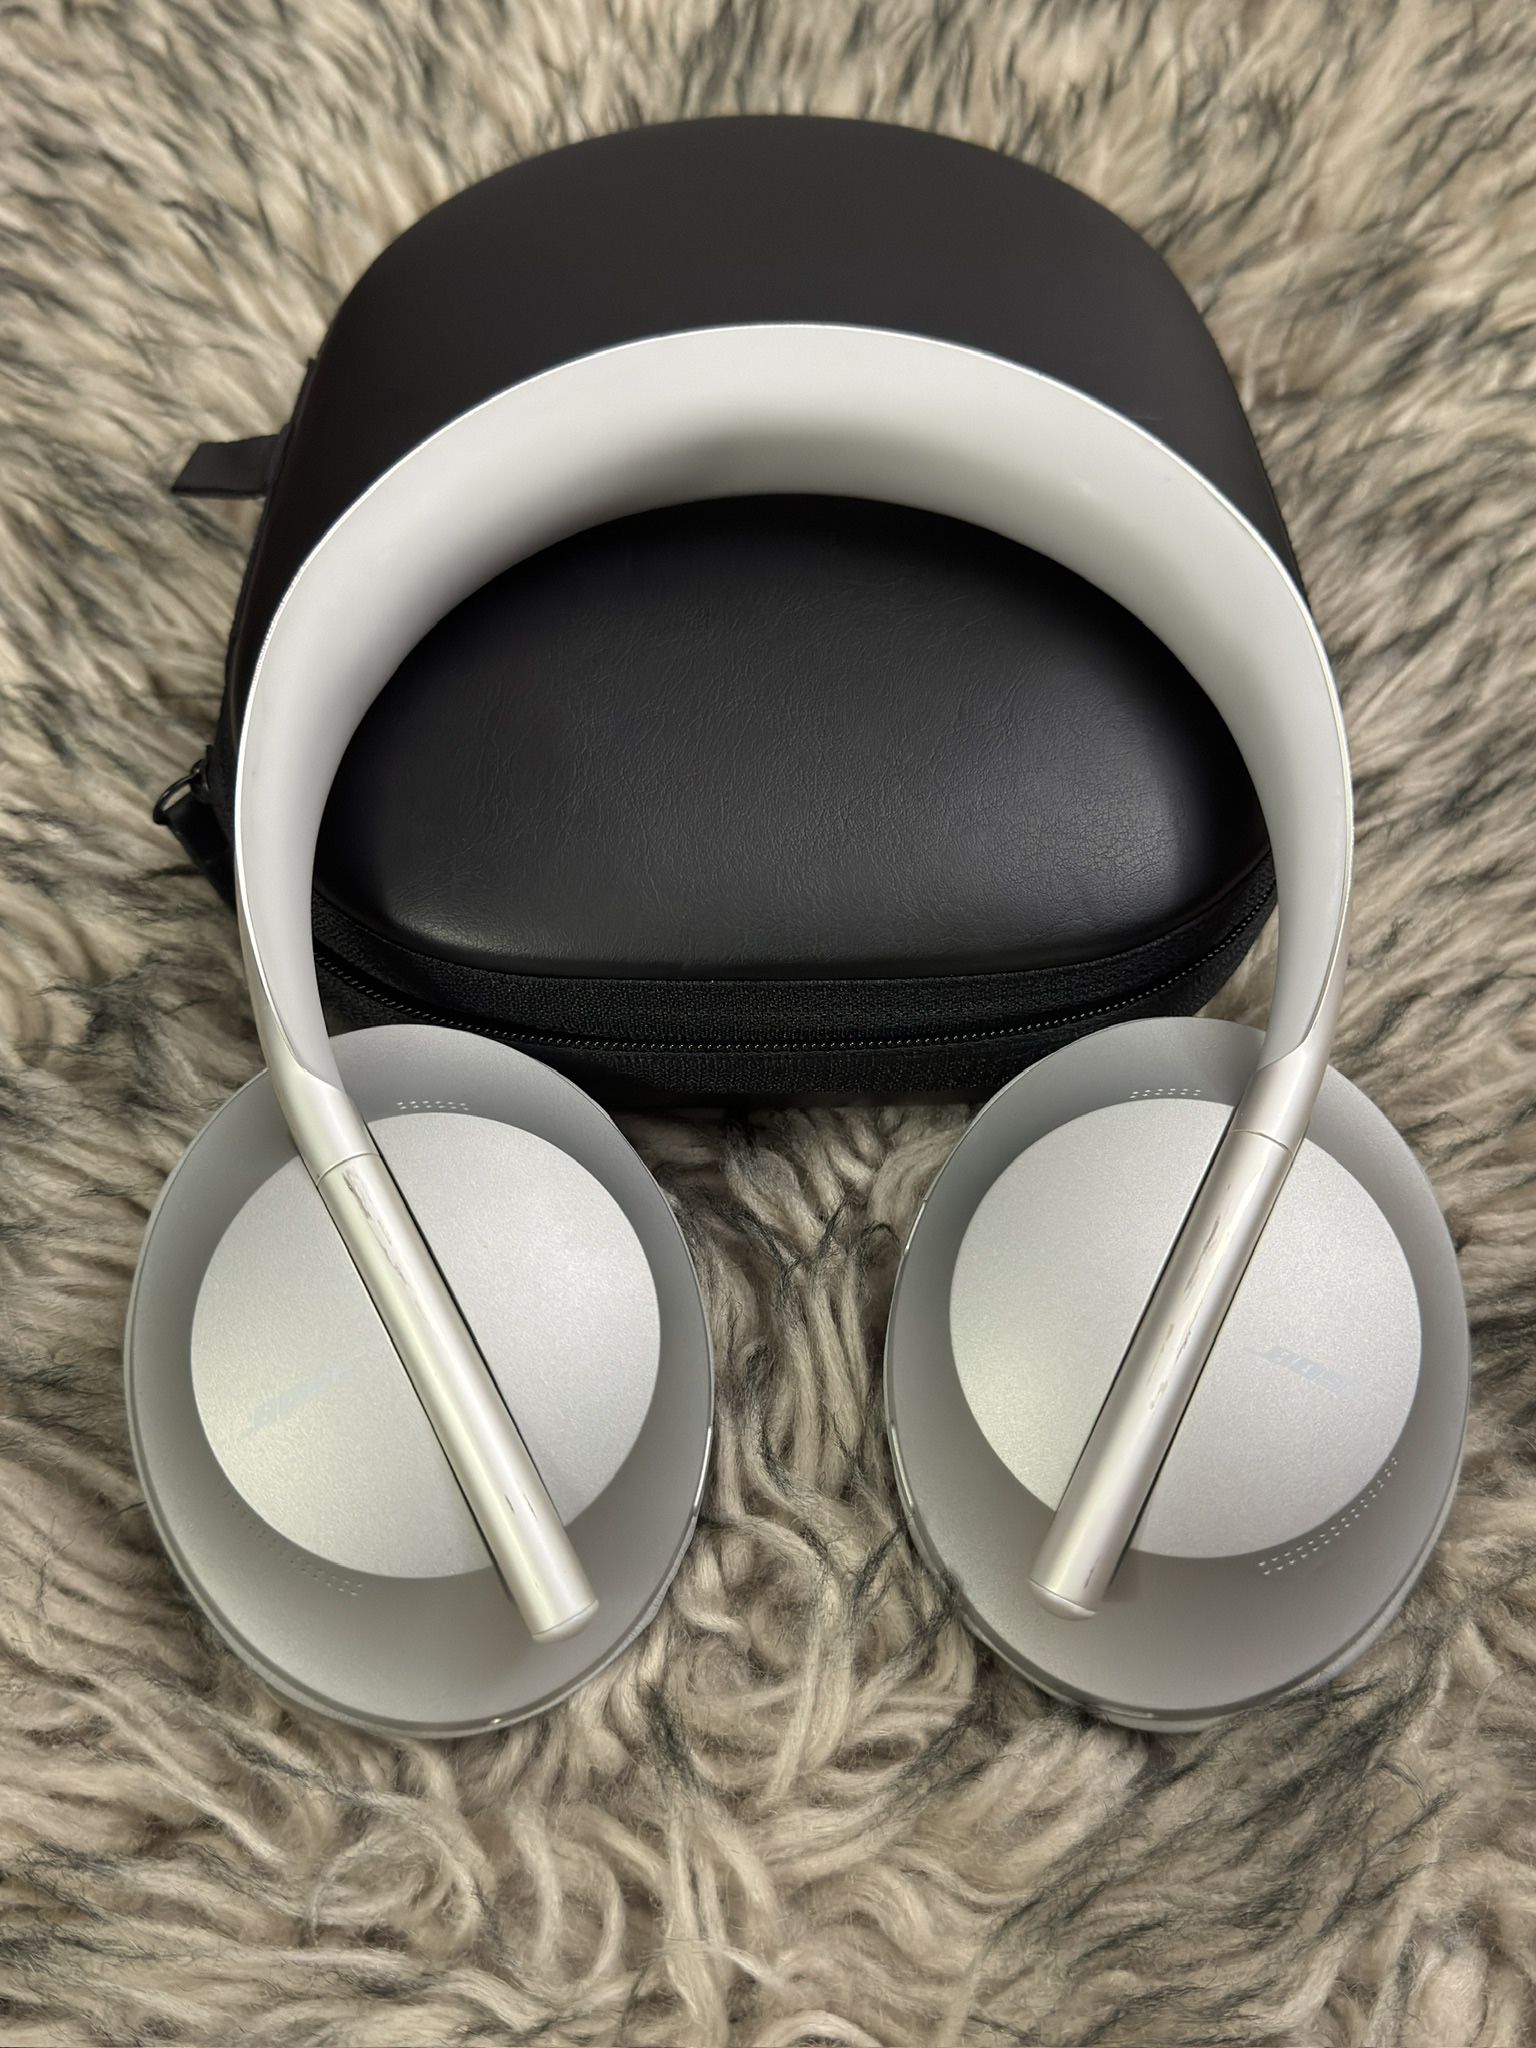 Bose Headphones 700, Noise Cancelling Bluetooth Over-Ear Wireless Headphones w/Built-In Microphone 